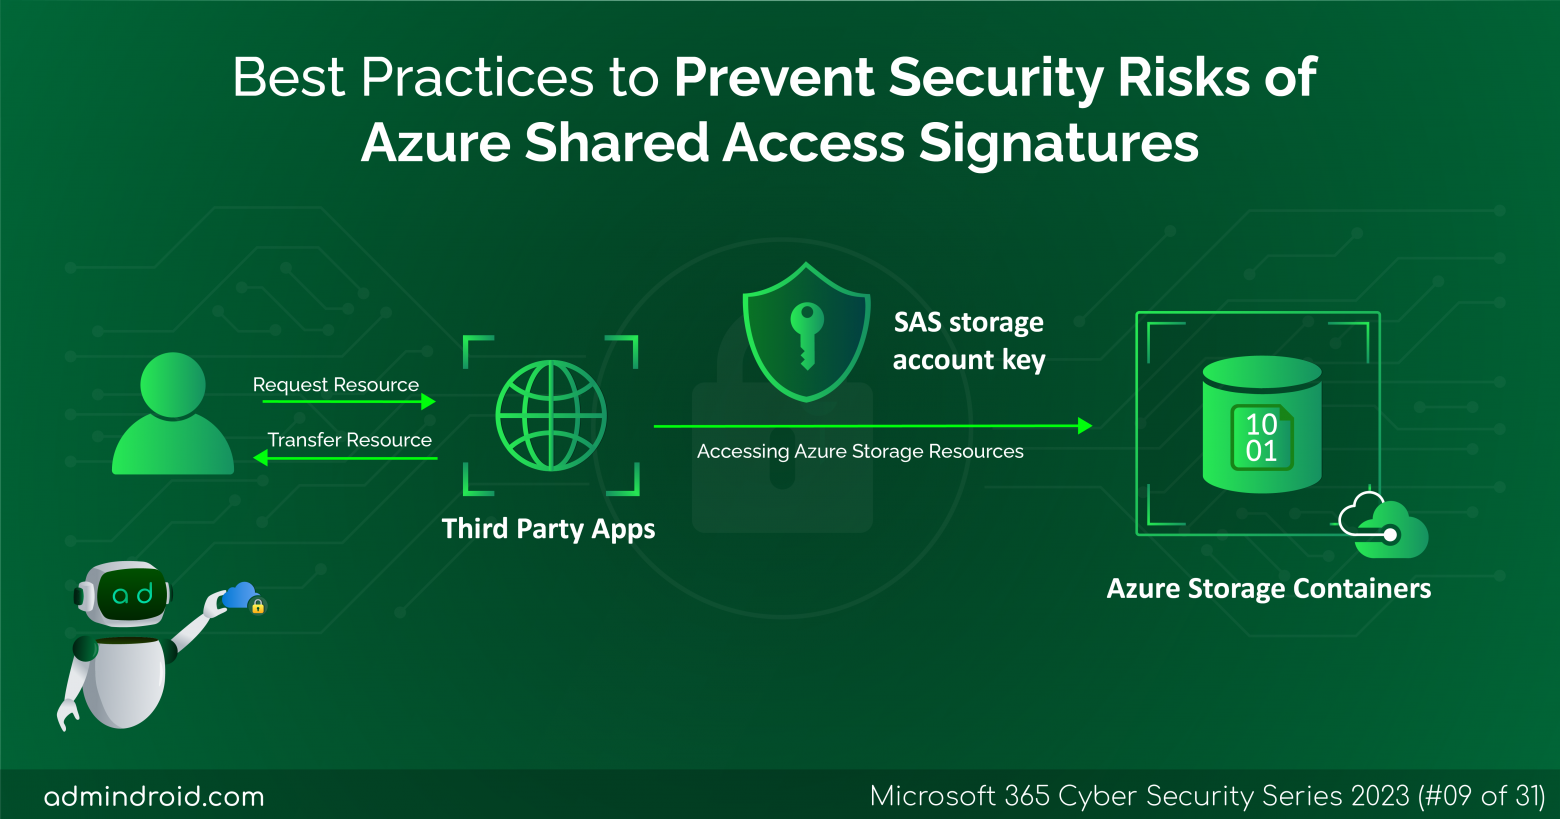 Best Practices to Prevent Security Risks in Azure Shared Access Signatures